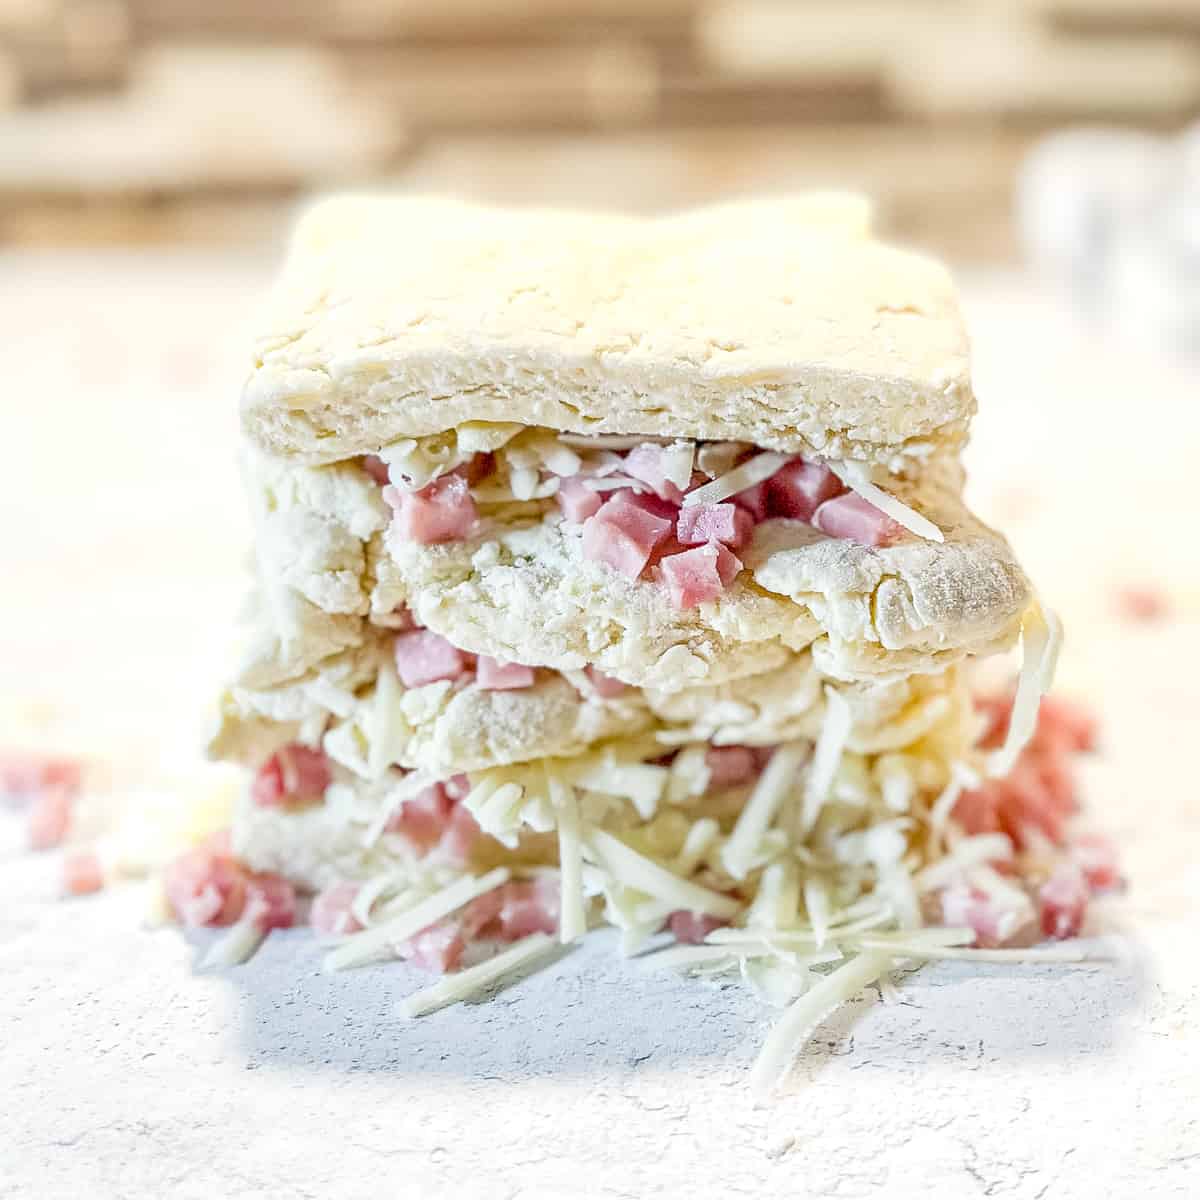 bits of ham and swiss cheese sandwiched between layers of biscuit dough.